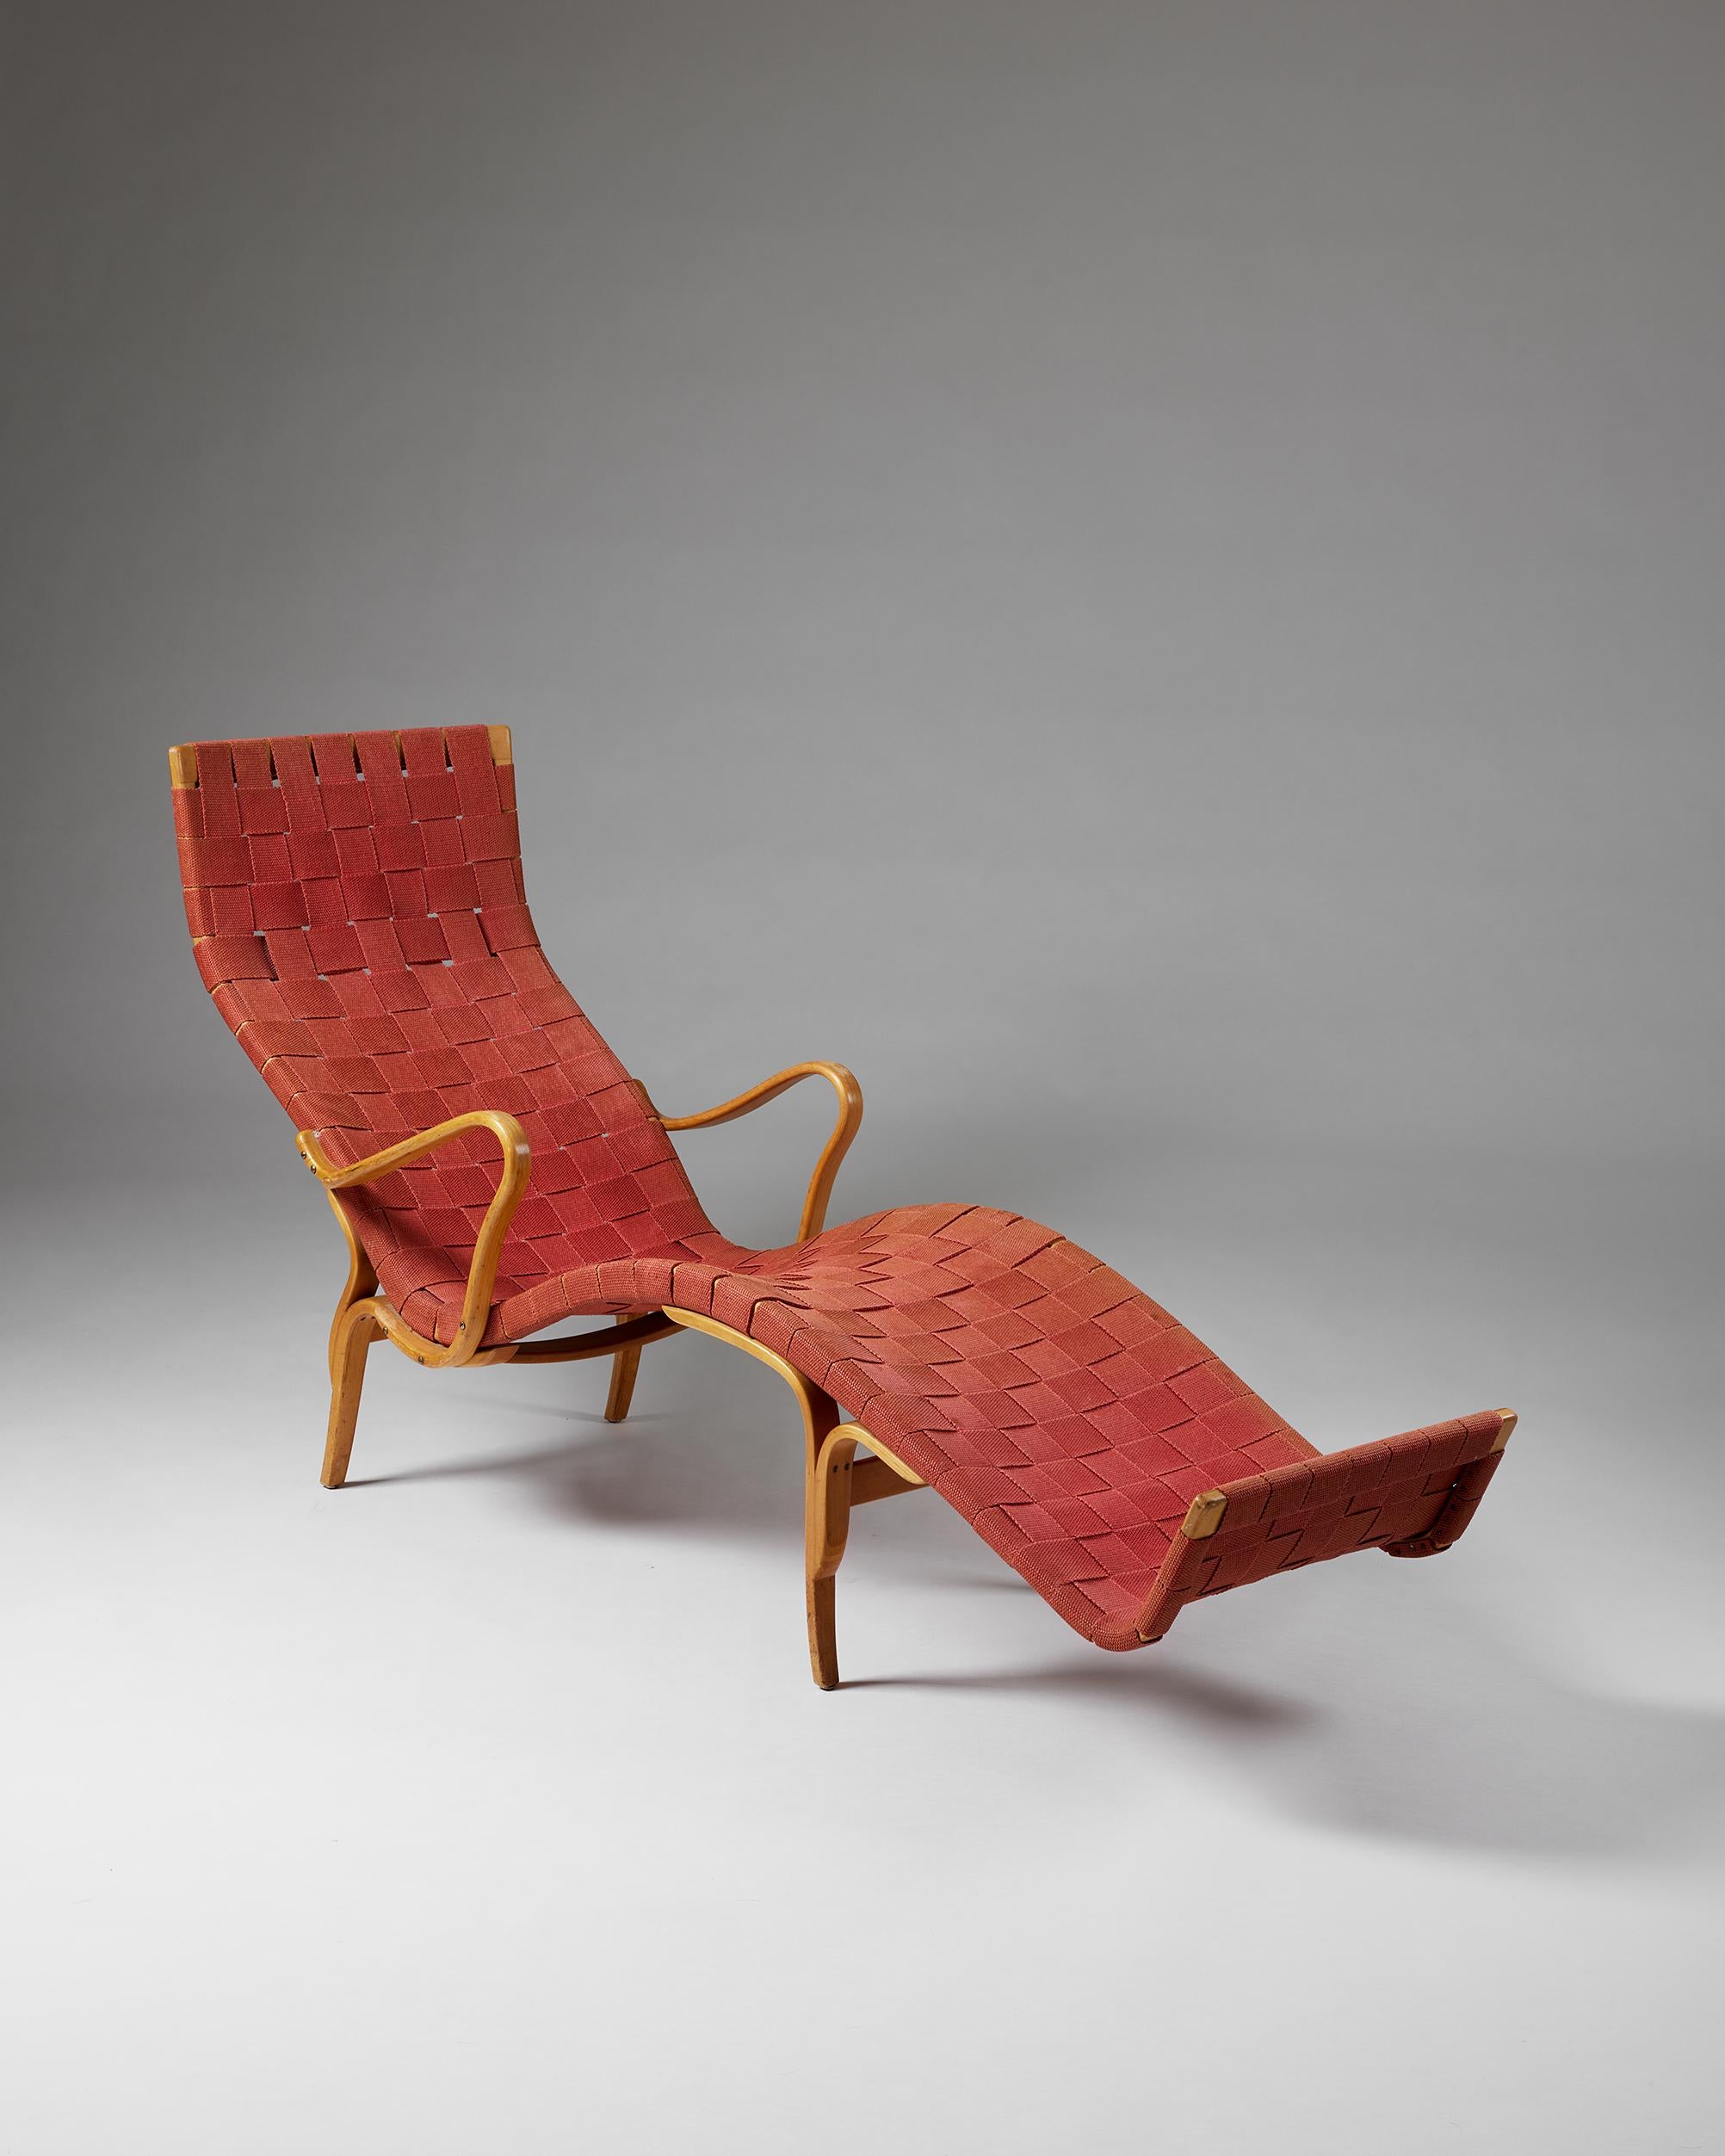 Lounge chair ‘Pernilla 3’ designed by Bruno Mathsson for Karl Mathsson,
Sweden, 1946 - 1947.

Laminated birch and textile.

Stamped.

Provenance: This chair, which was specially ordered by a customer, to adapt to their longer height.

H: